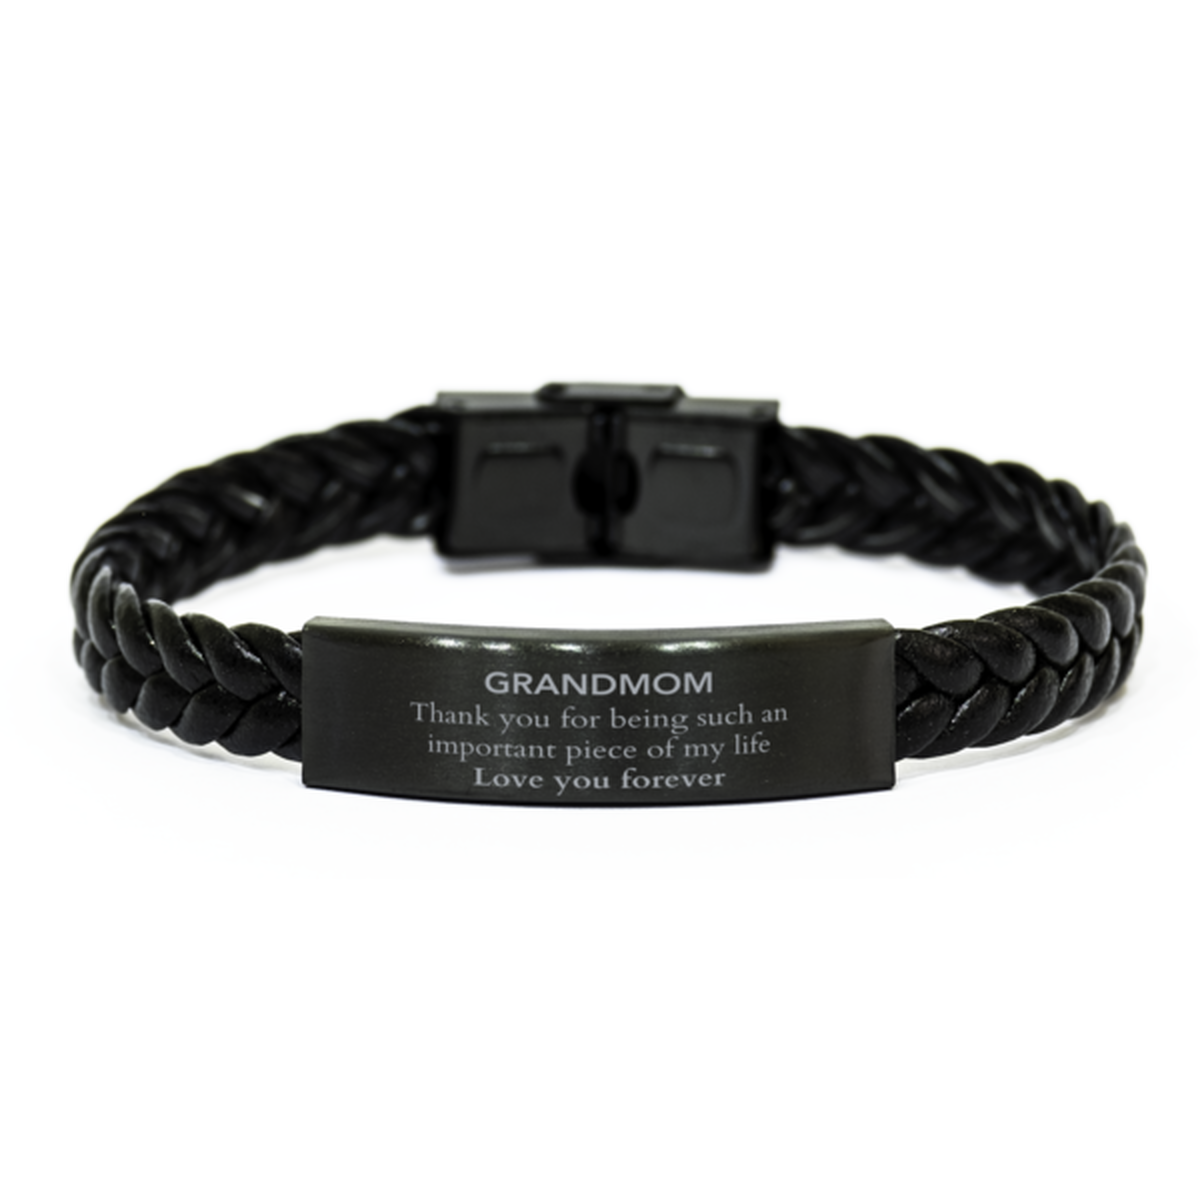 Appropriate Grandmom Braided Leather Bracelet Epic Birthday Gifts for Grandmom Thank you for being such an important piece of my life Grandmom Christmas Mothers Fathers Day